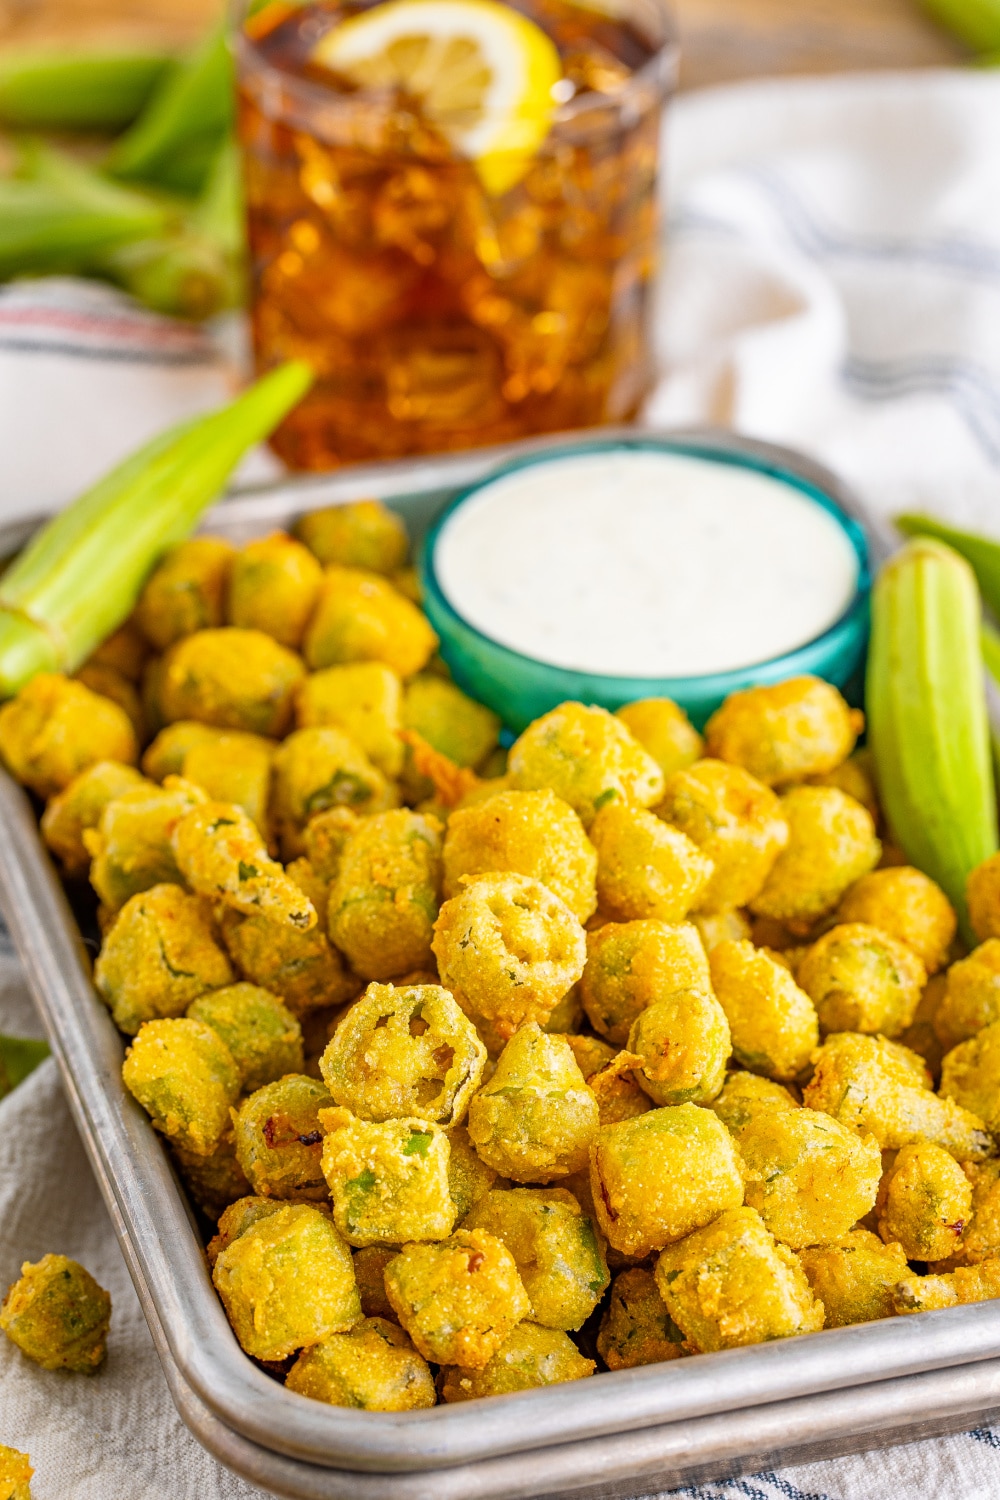 A tray filled with fried okra on a table with a glass of sweet iced tea.